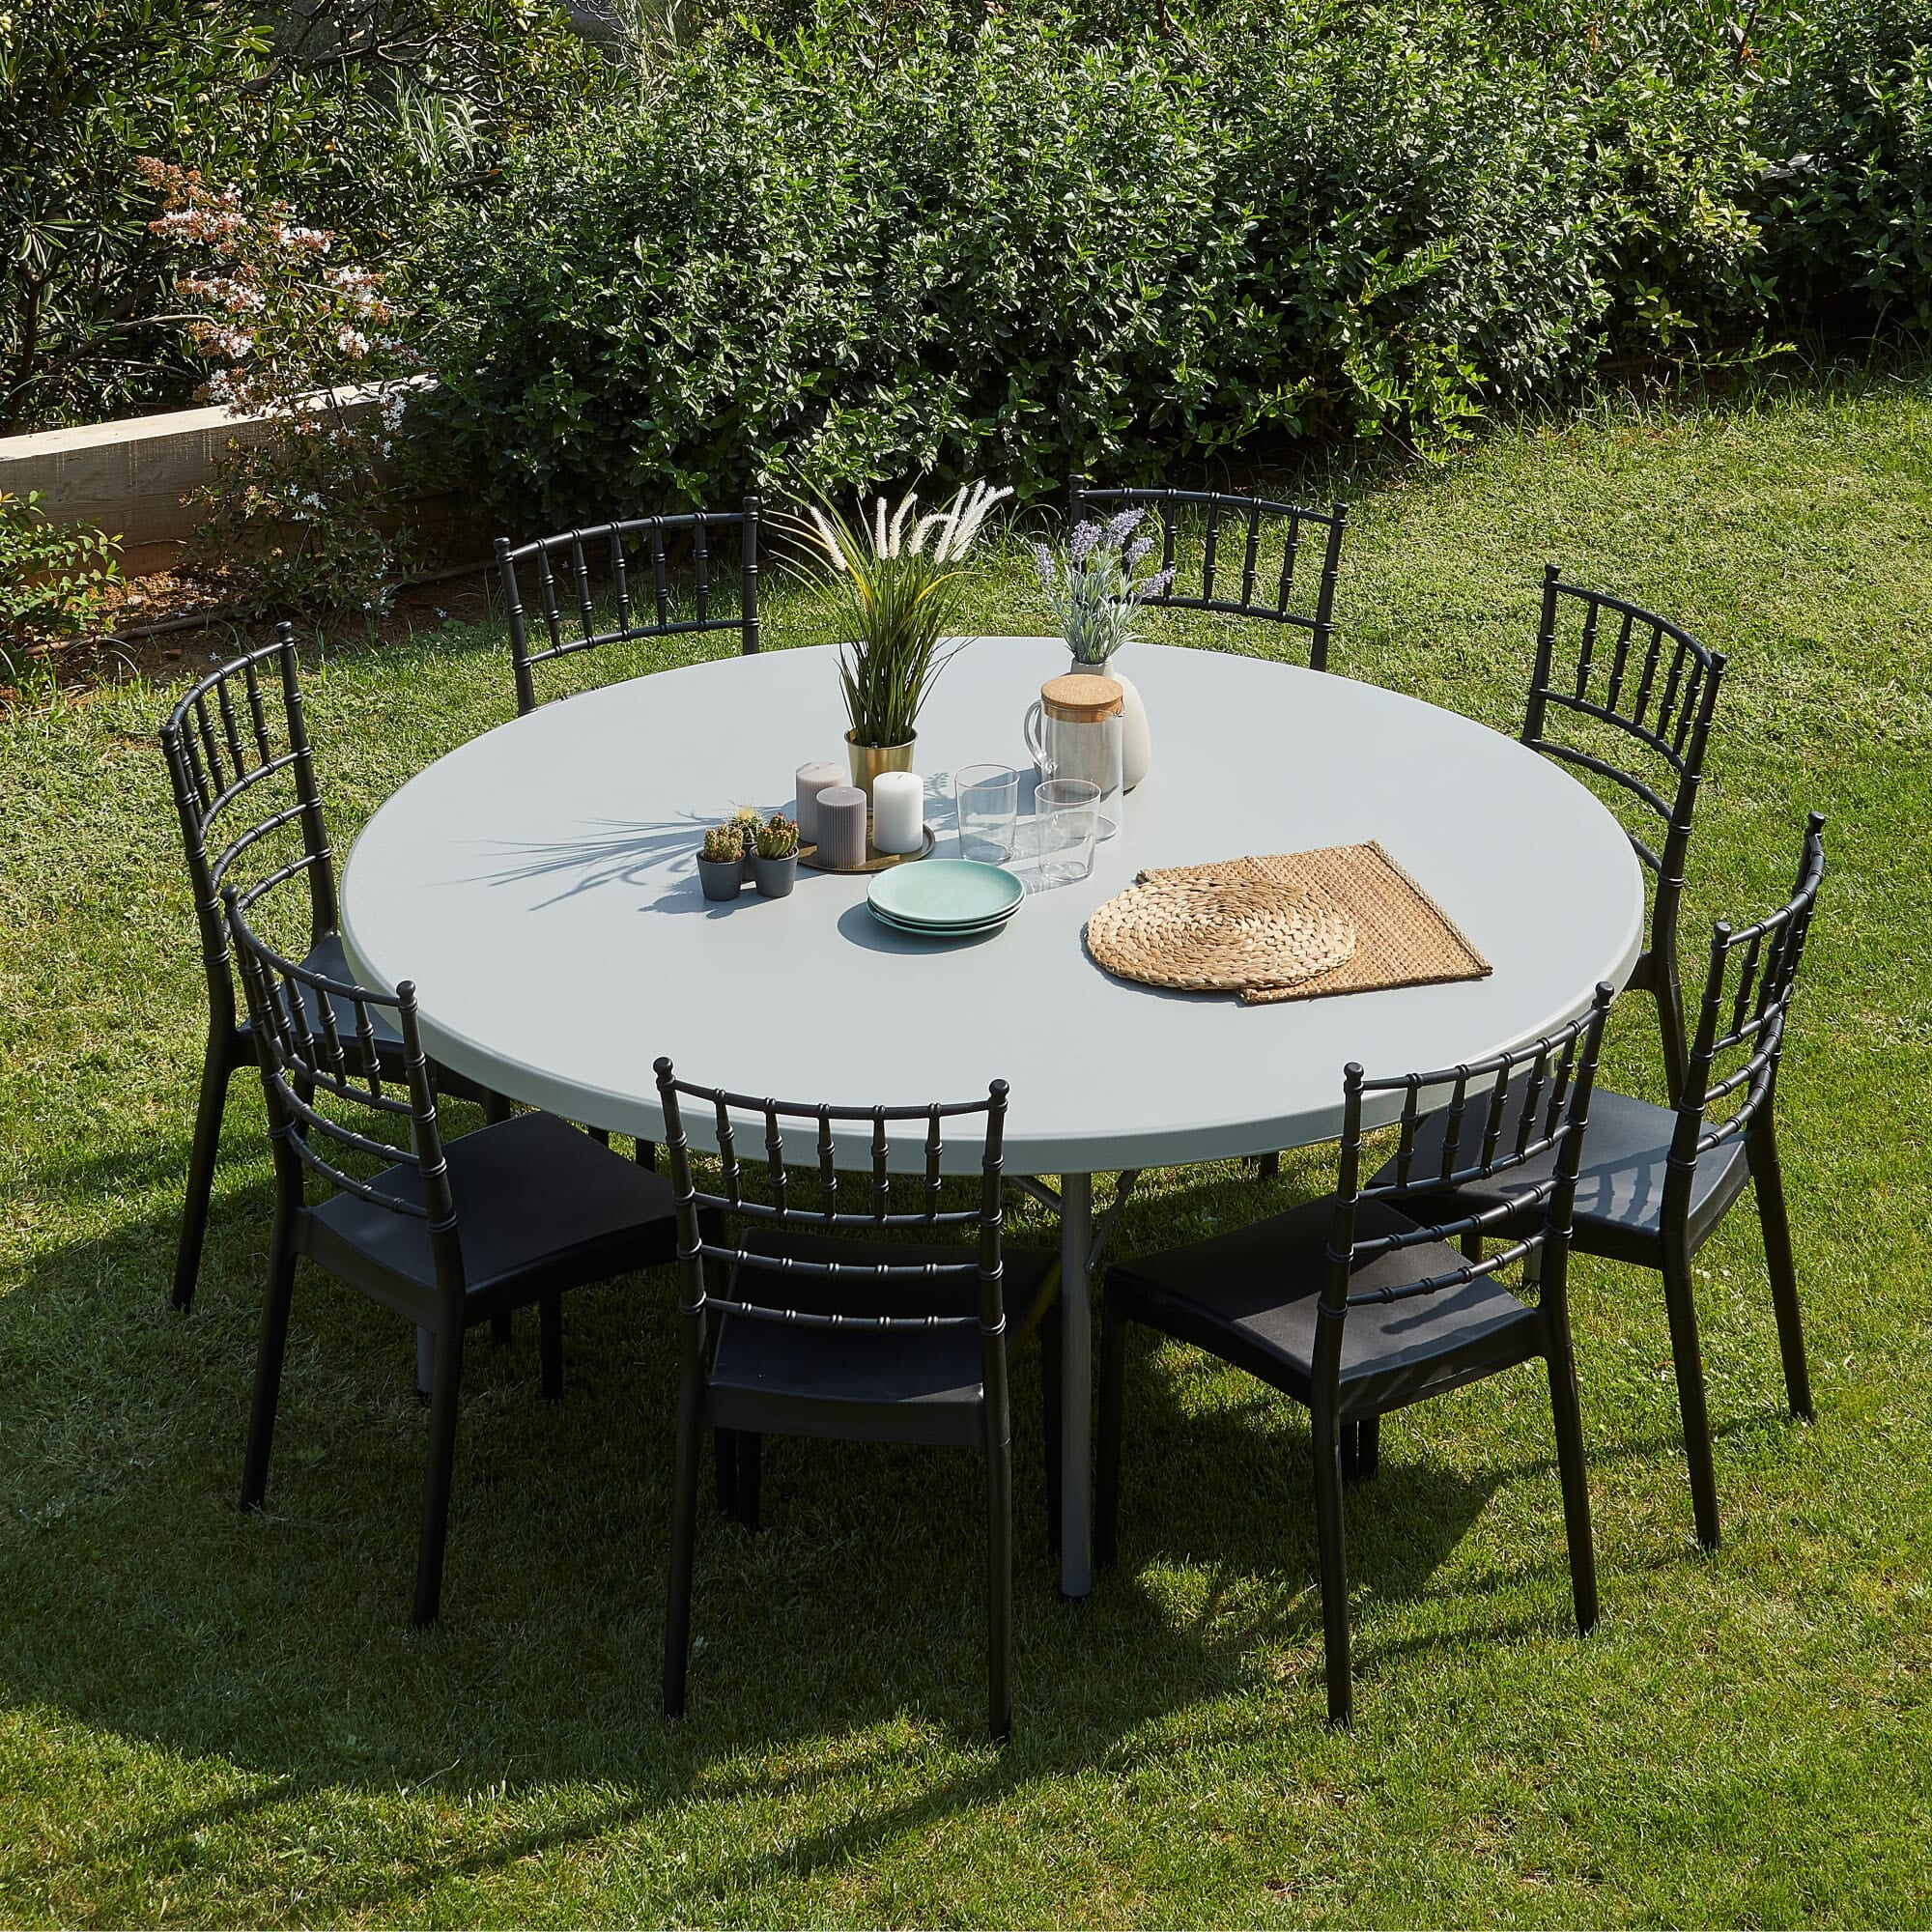 Garbar Beethoven Round folding table indoors, outdoors Ø180